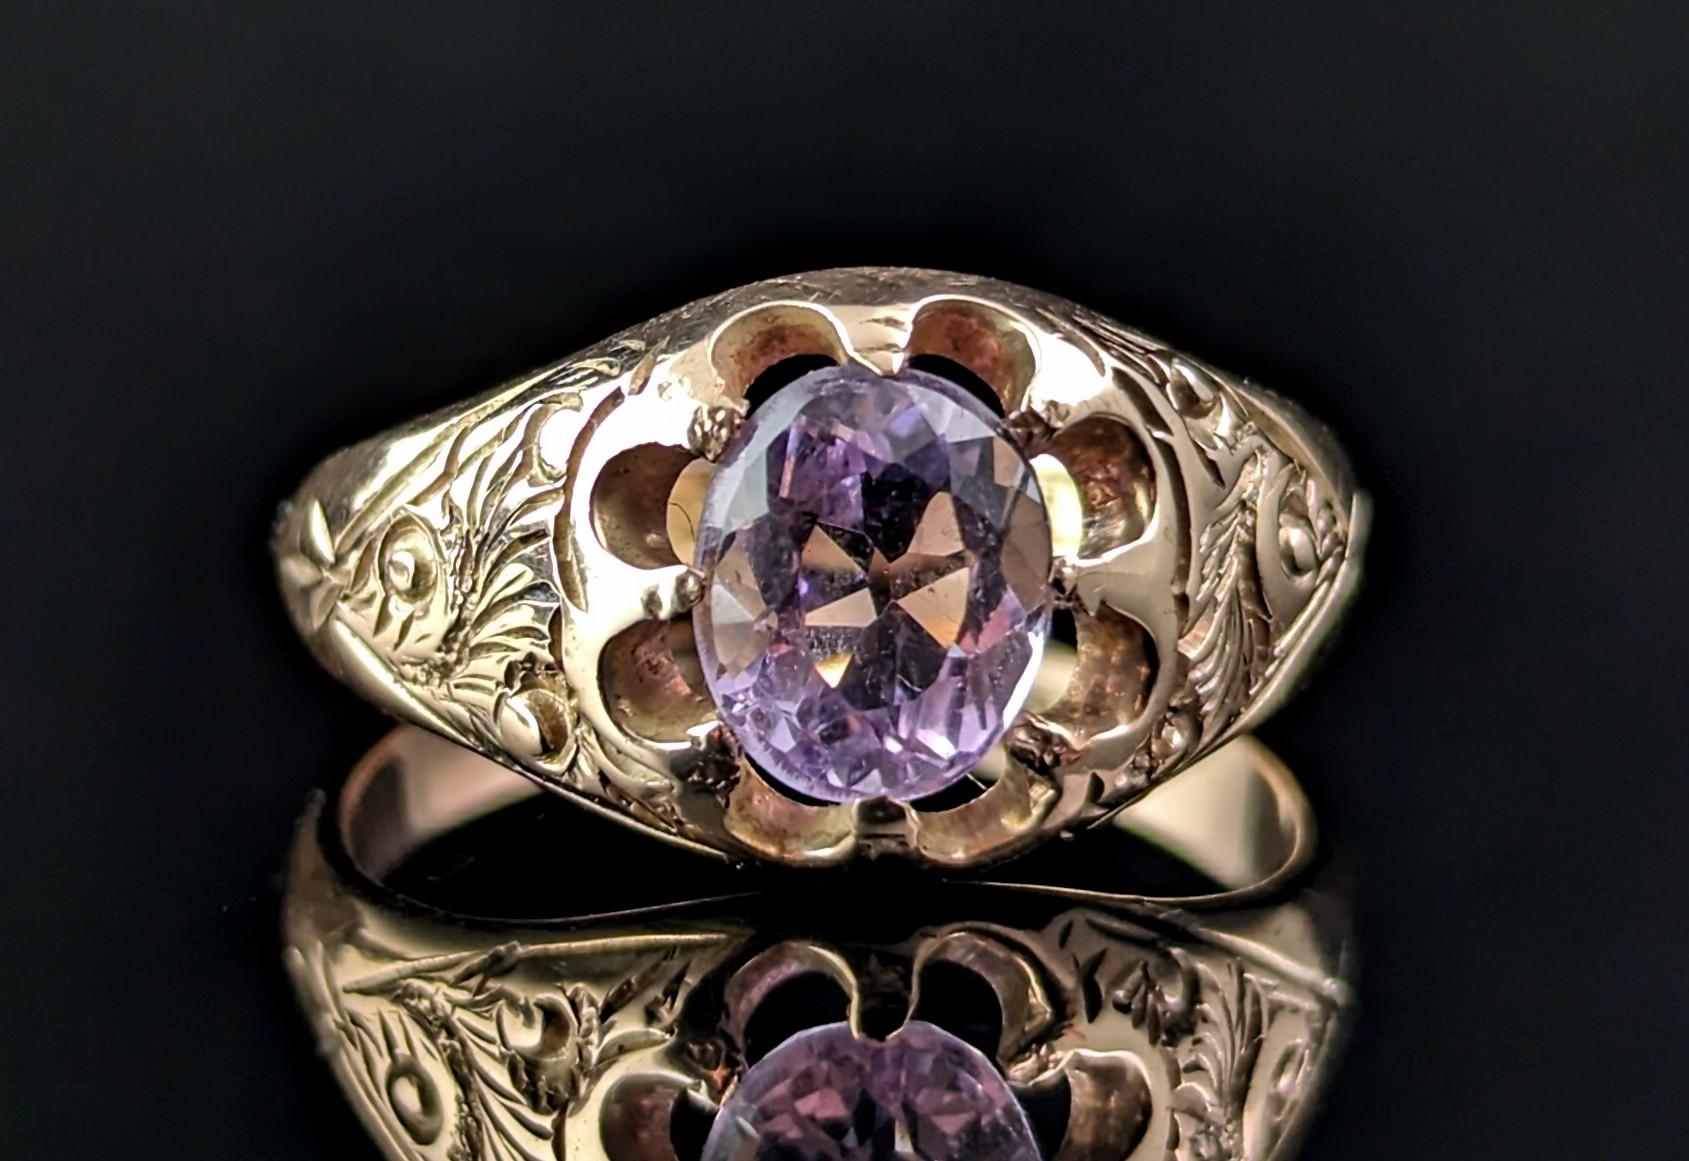 We can't get enough of this magnificent bold vintage Amethyst signet or solitaire ring.

It was crafted in the late 1920s, almost 100 years ago and is very much in a signet or pinky ring style.

It has a lovely, single, oval cut, light purple